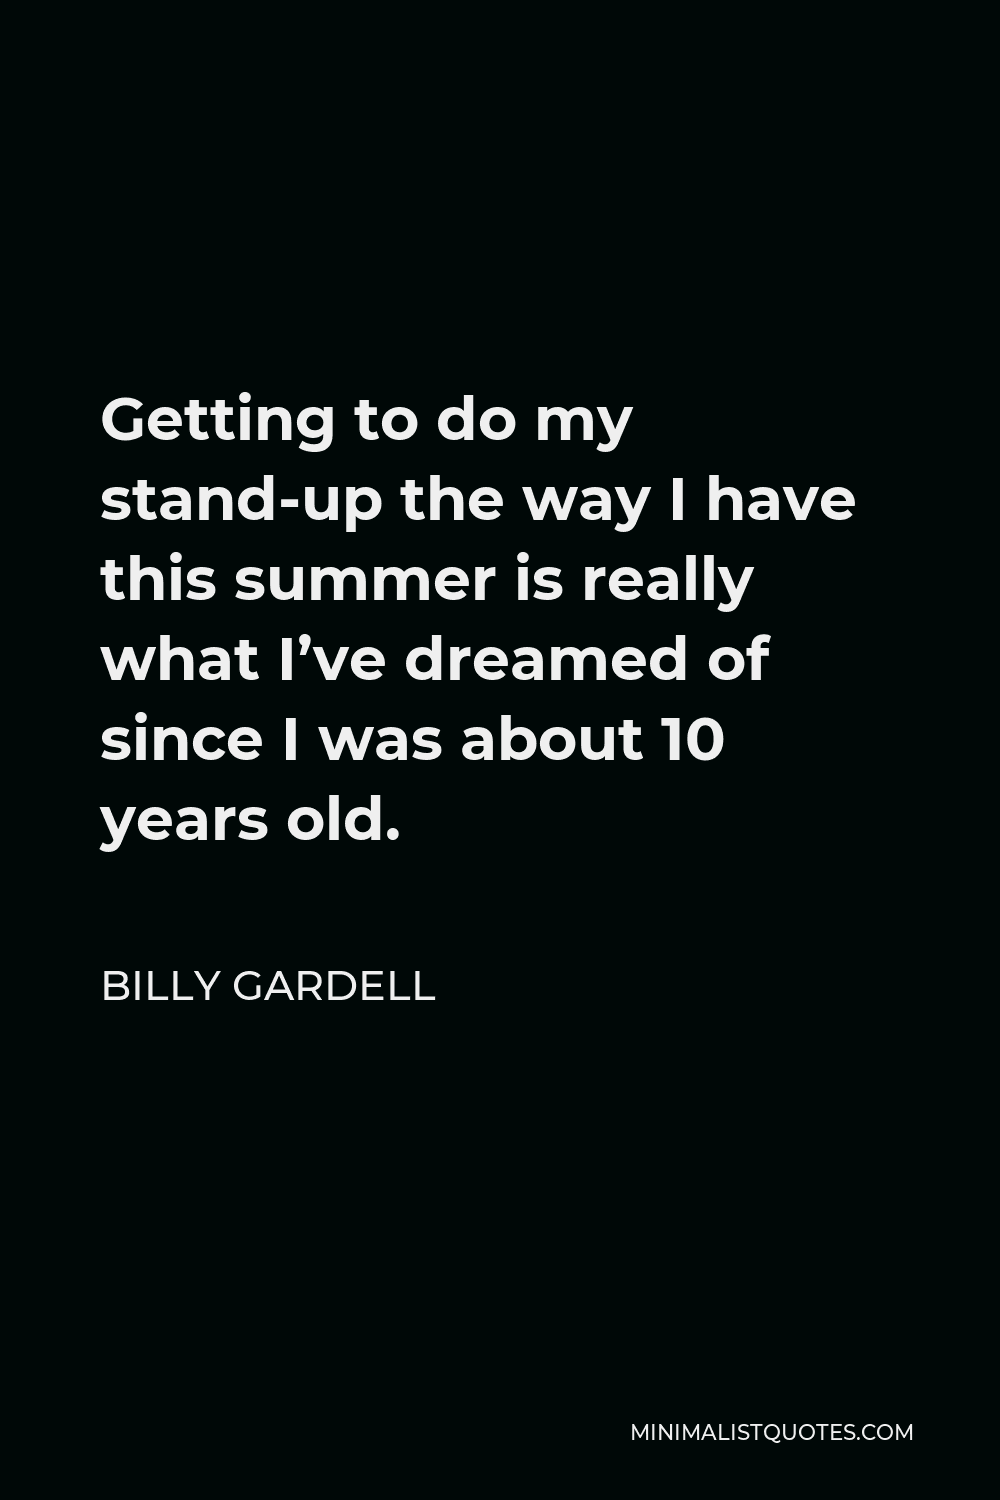 Billy Gardell Quote - Getting to do my stand-up the way I have this summer is really what I’ve dreamed of since I was about 10 years old.